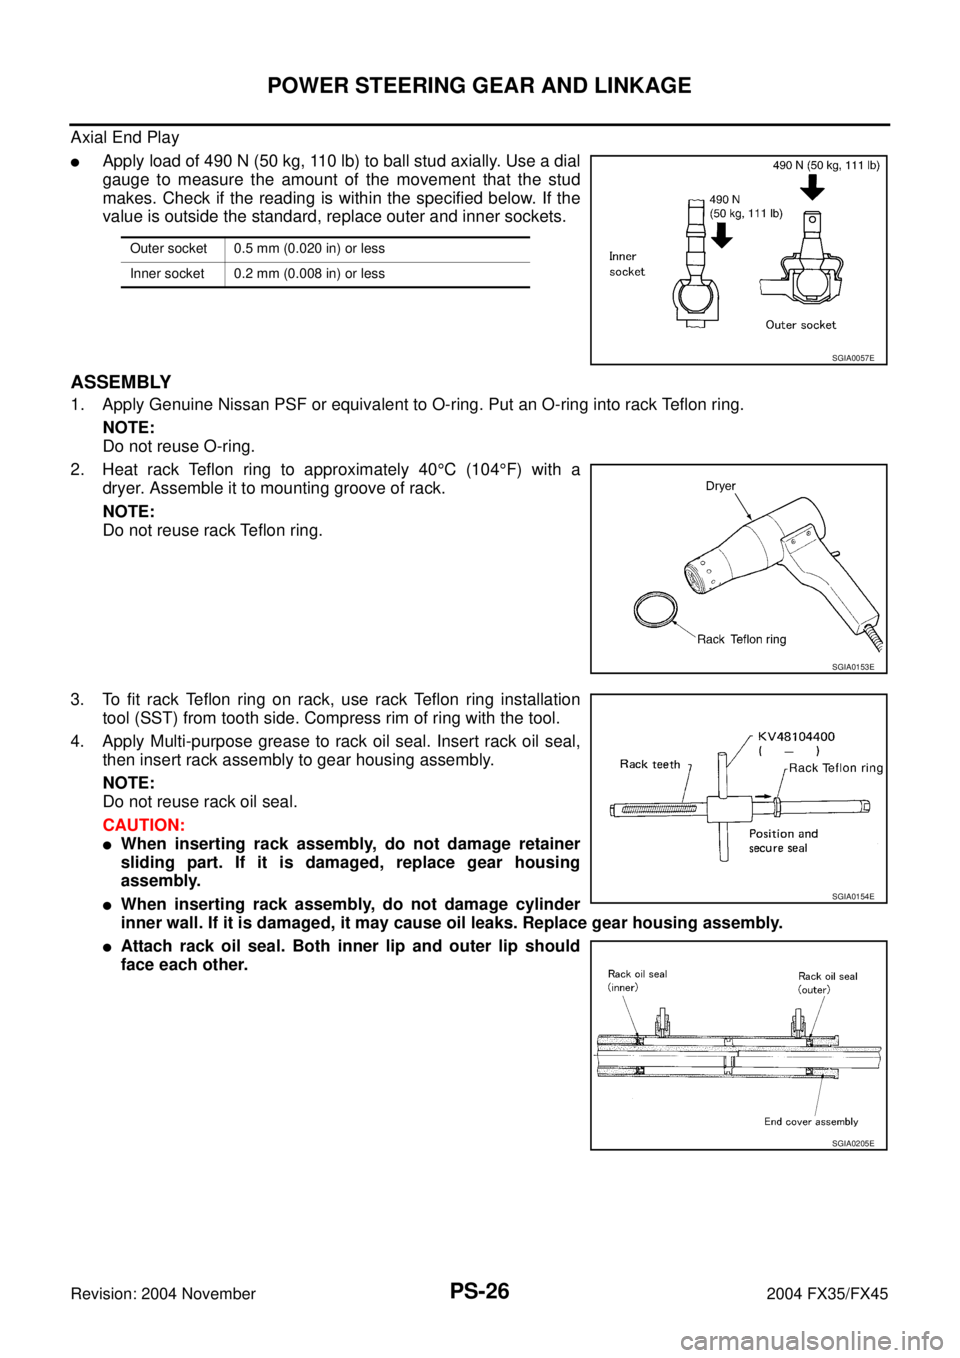 INFINITI FX35 2004  Service Manual PS-26
POWER STEERING GEAR AND LINKAGE
Revision: 2004 November 2004 FX35/FX45
Axial End Play
Apply load of 490 N (50 kg, 110 lb) to ball stud axially. Use a dial
gauge to measure the amount of the mov